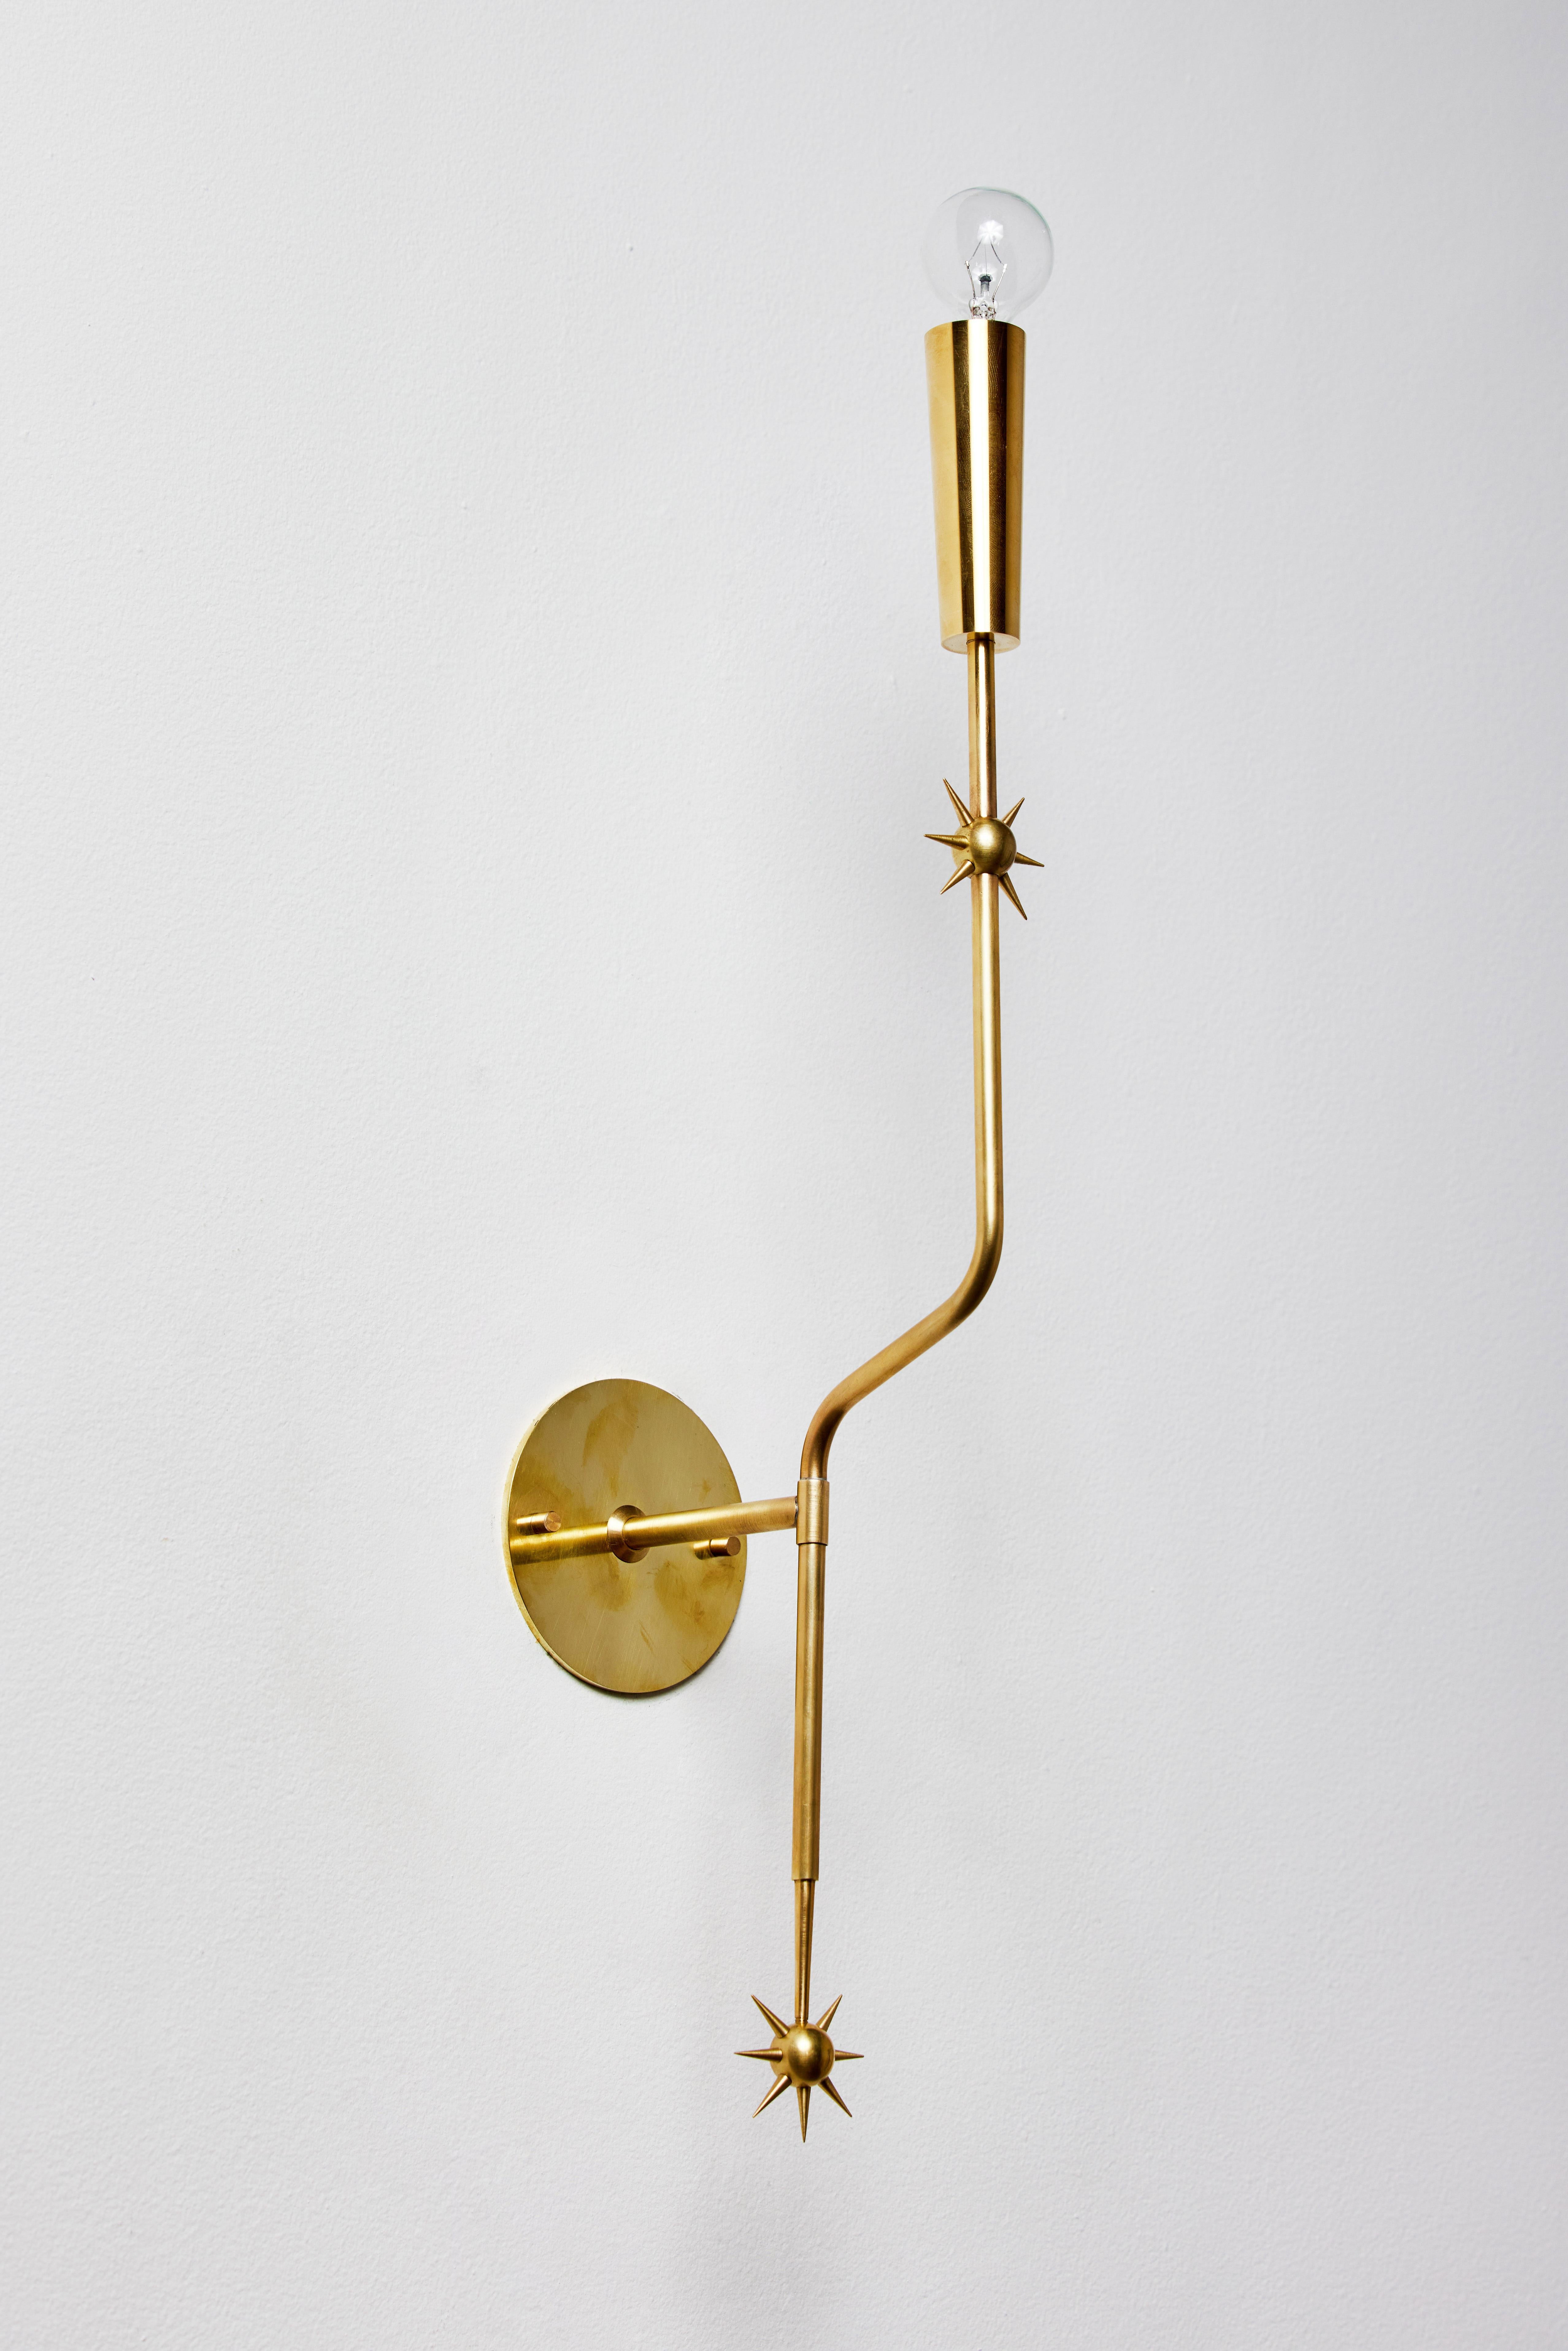 Rewire custom brass sconce in the style of Stilnovo. Current production custom fabricated in Los Angeles by rewire gallery. Brass, custom brass backplate. Takes one E12 candelabra 40-60w maximum bulb. Bulb provided as a one time courtesy.